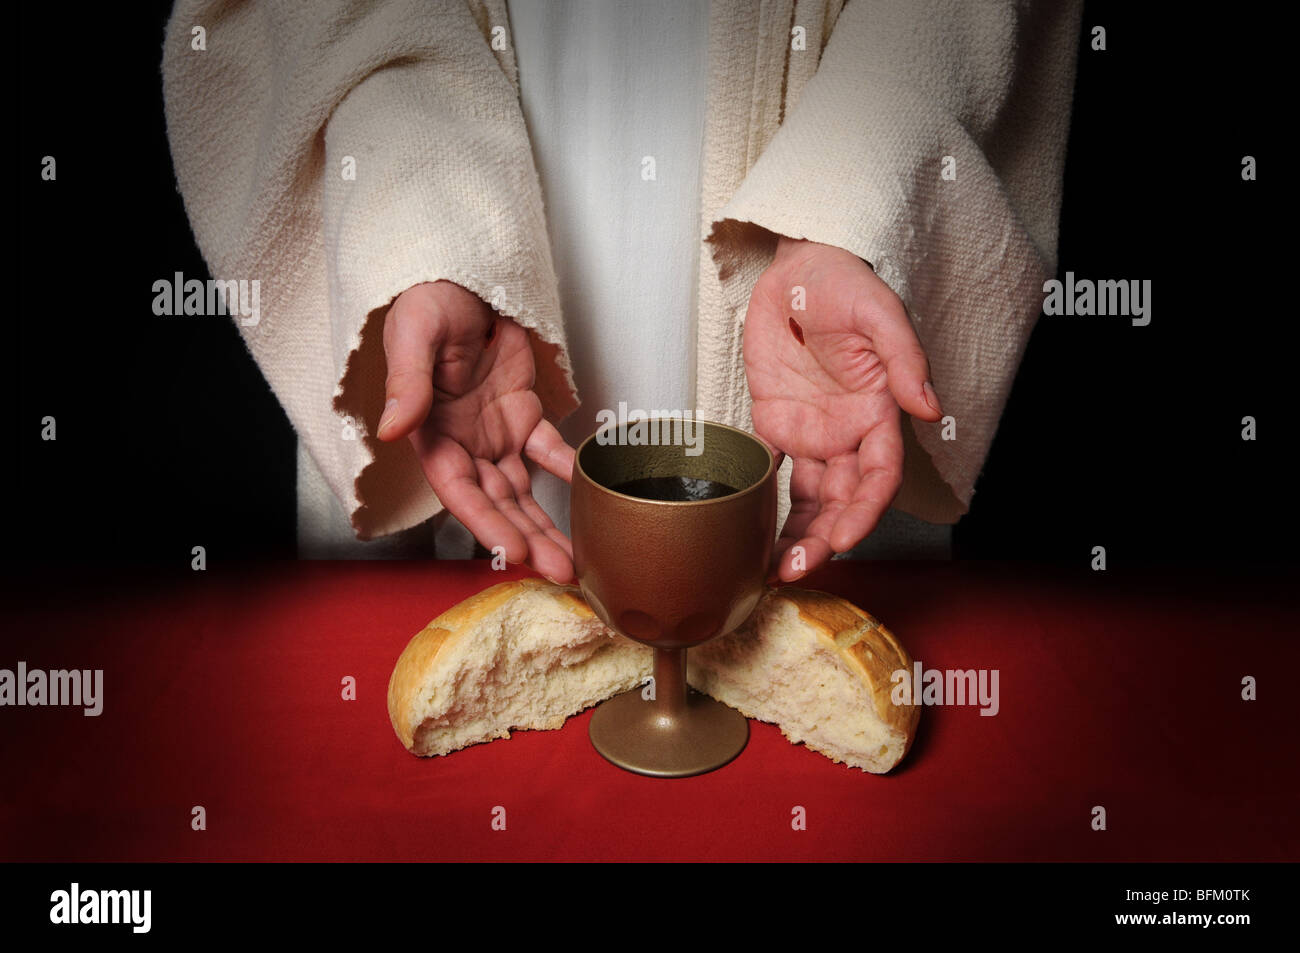 The hands of Jesus offering the Communion wine and bread Stock Photo